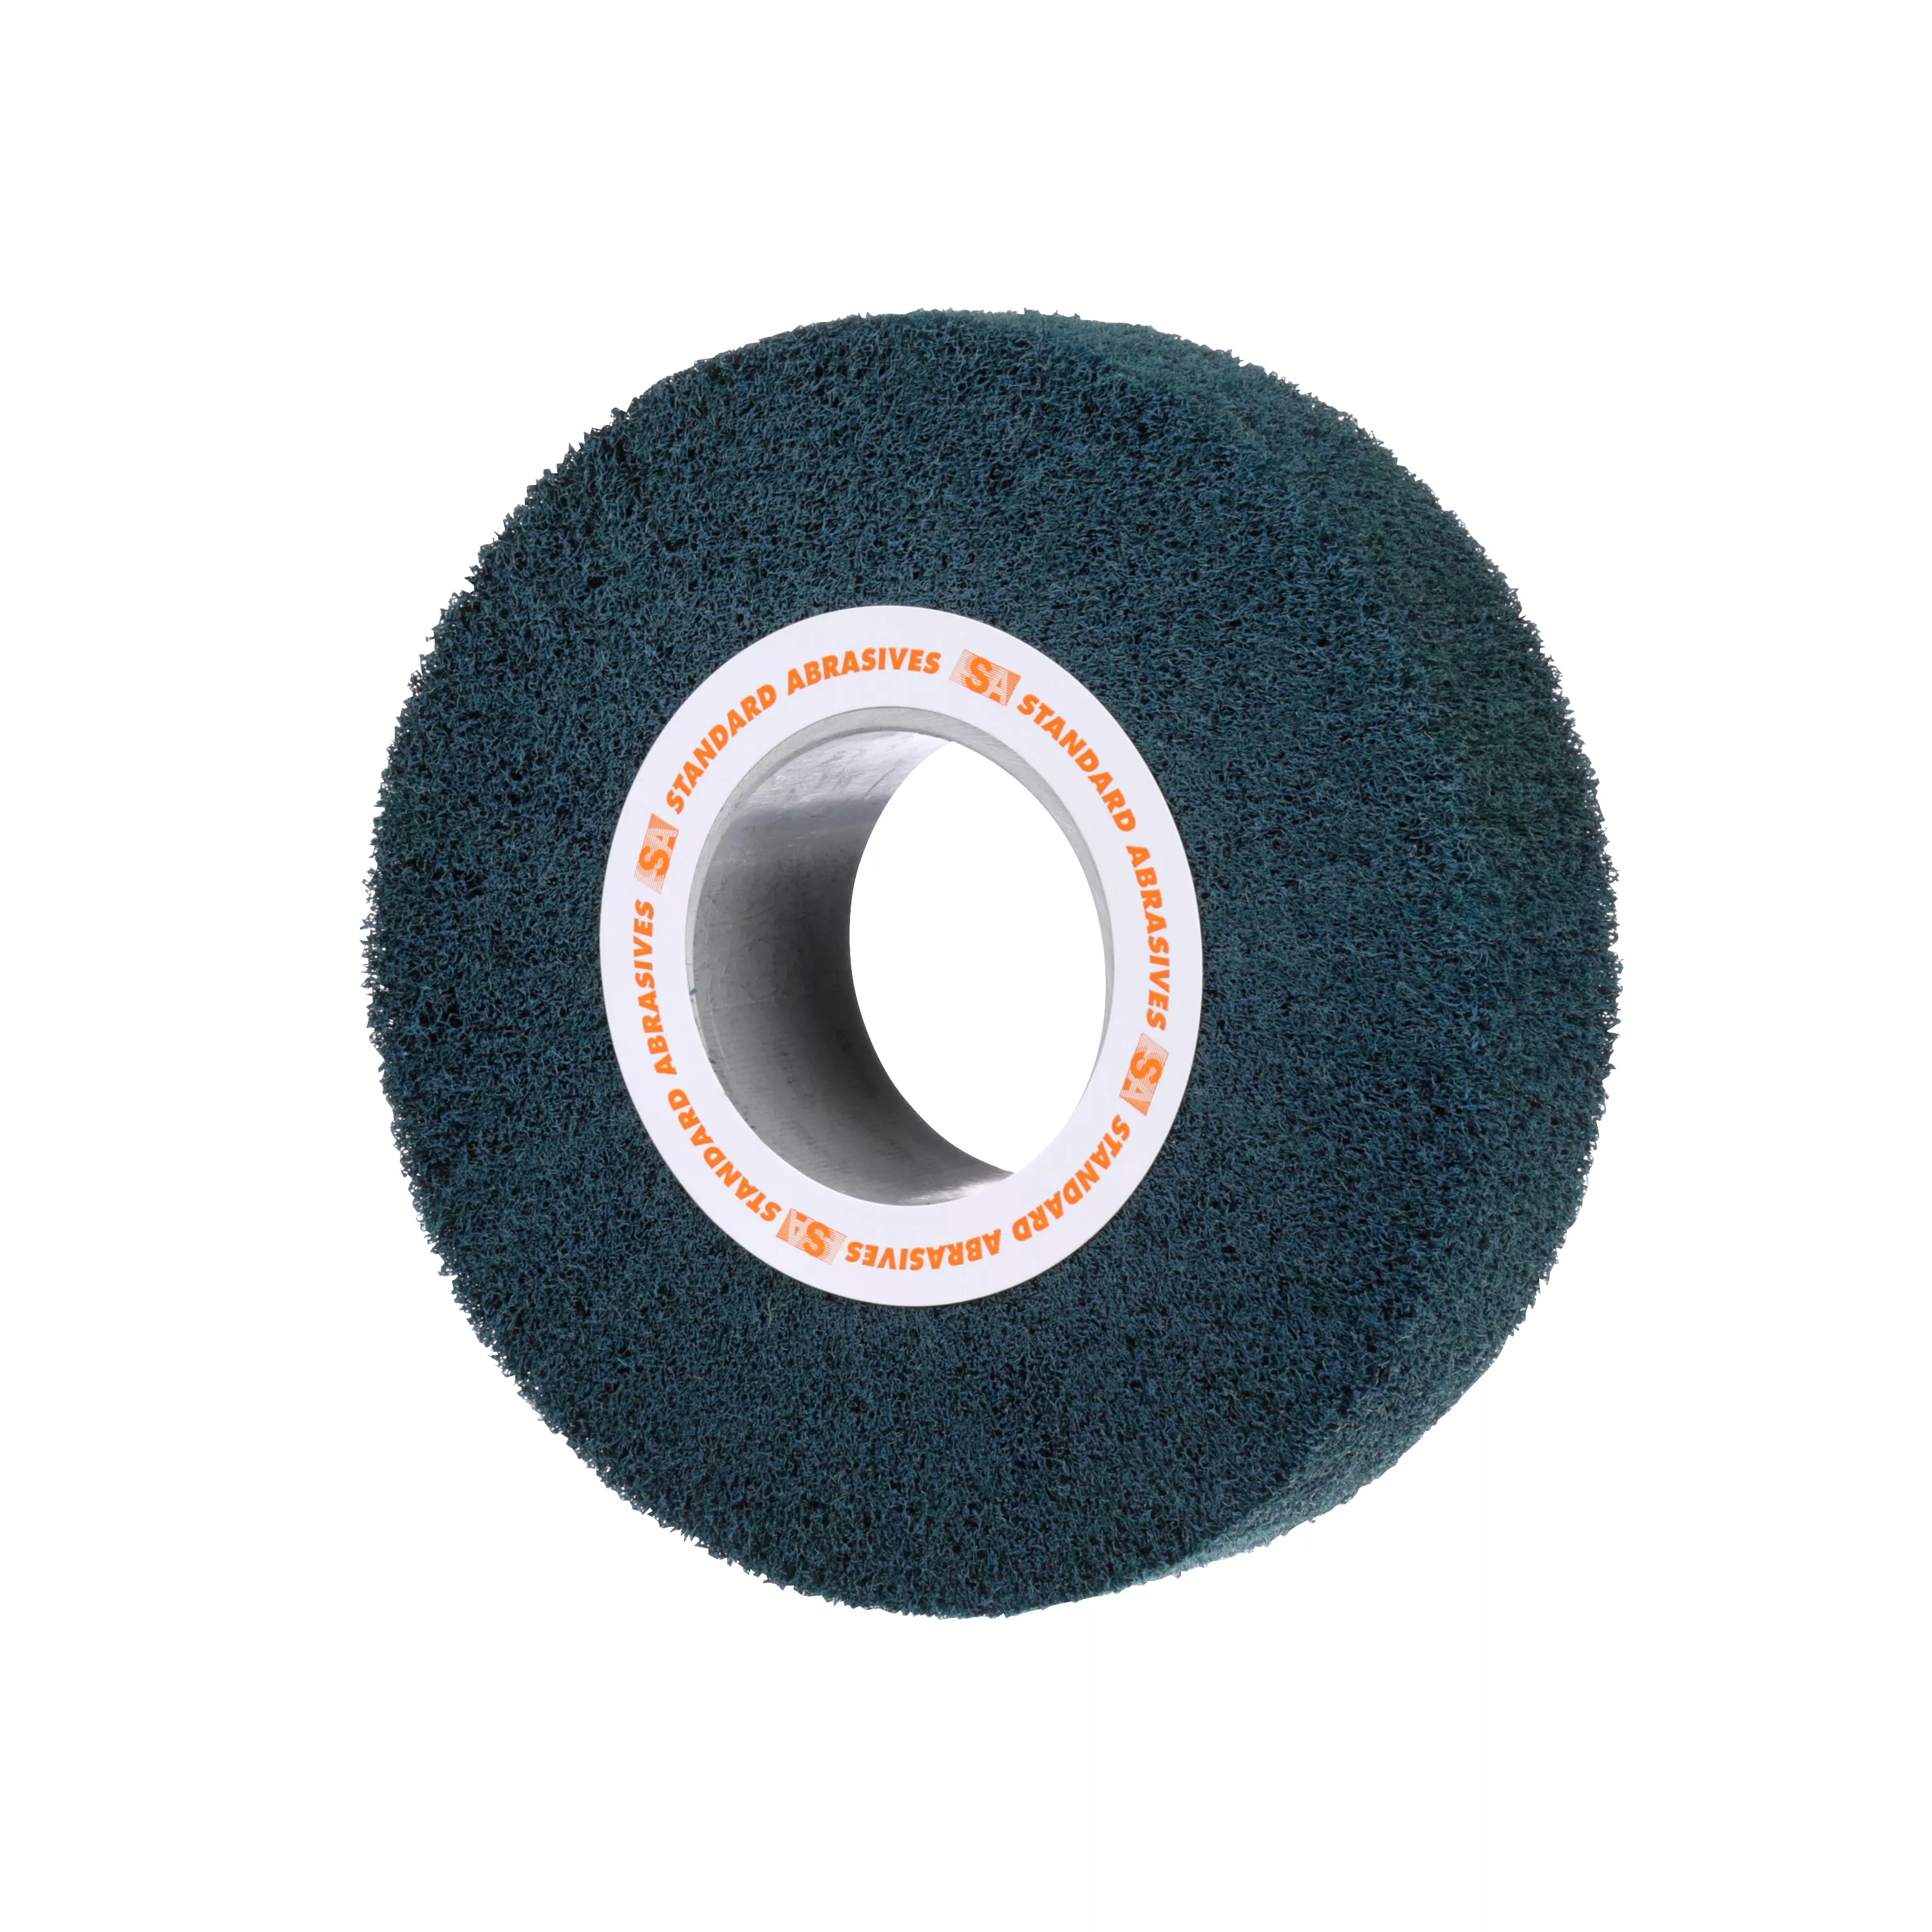 Product Number 875175 | Standard Abrasives™ Buff and Blend HS-F Flap Brush 875175